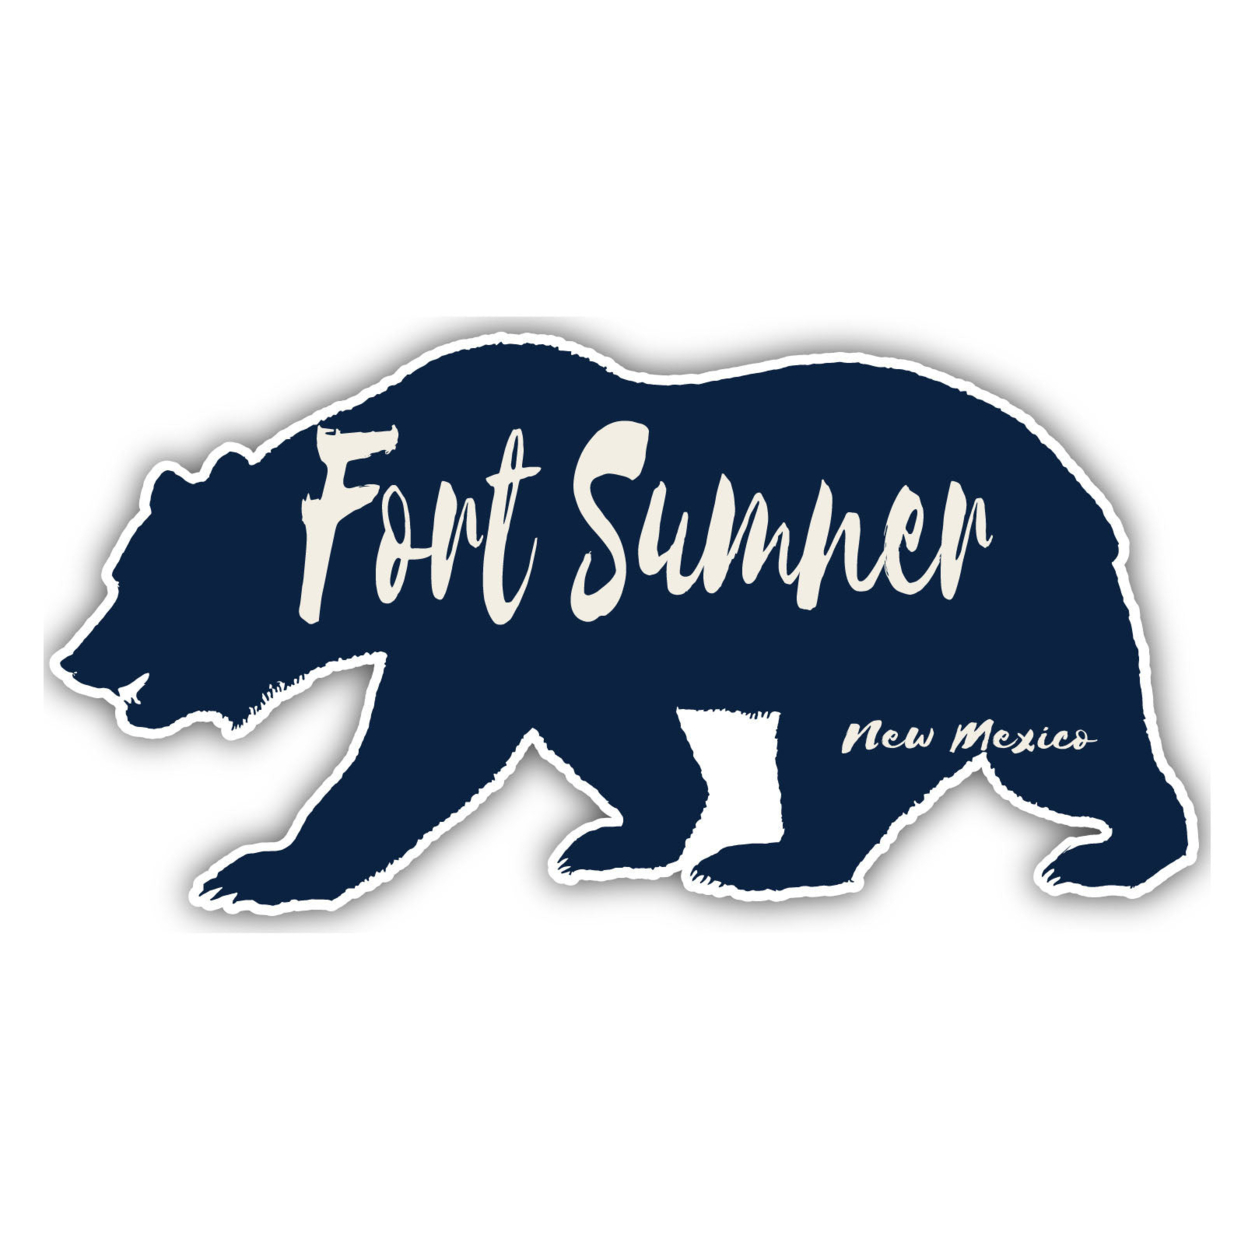 Fort Sumner New Mexico Souvenir Decorative Stickers (Choose Theme And Size) - Single Unit, 10-Inch, Bear